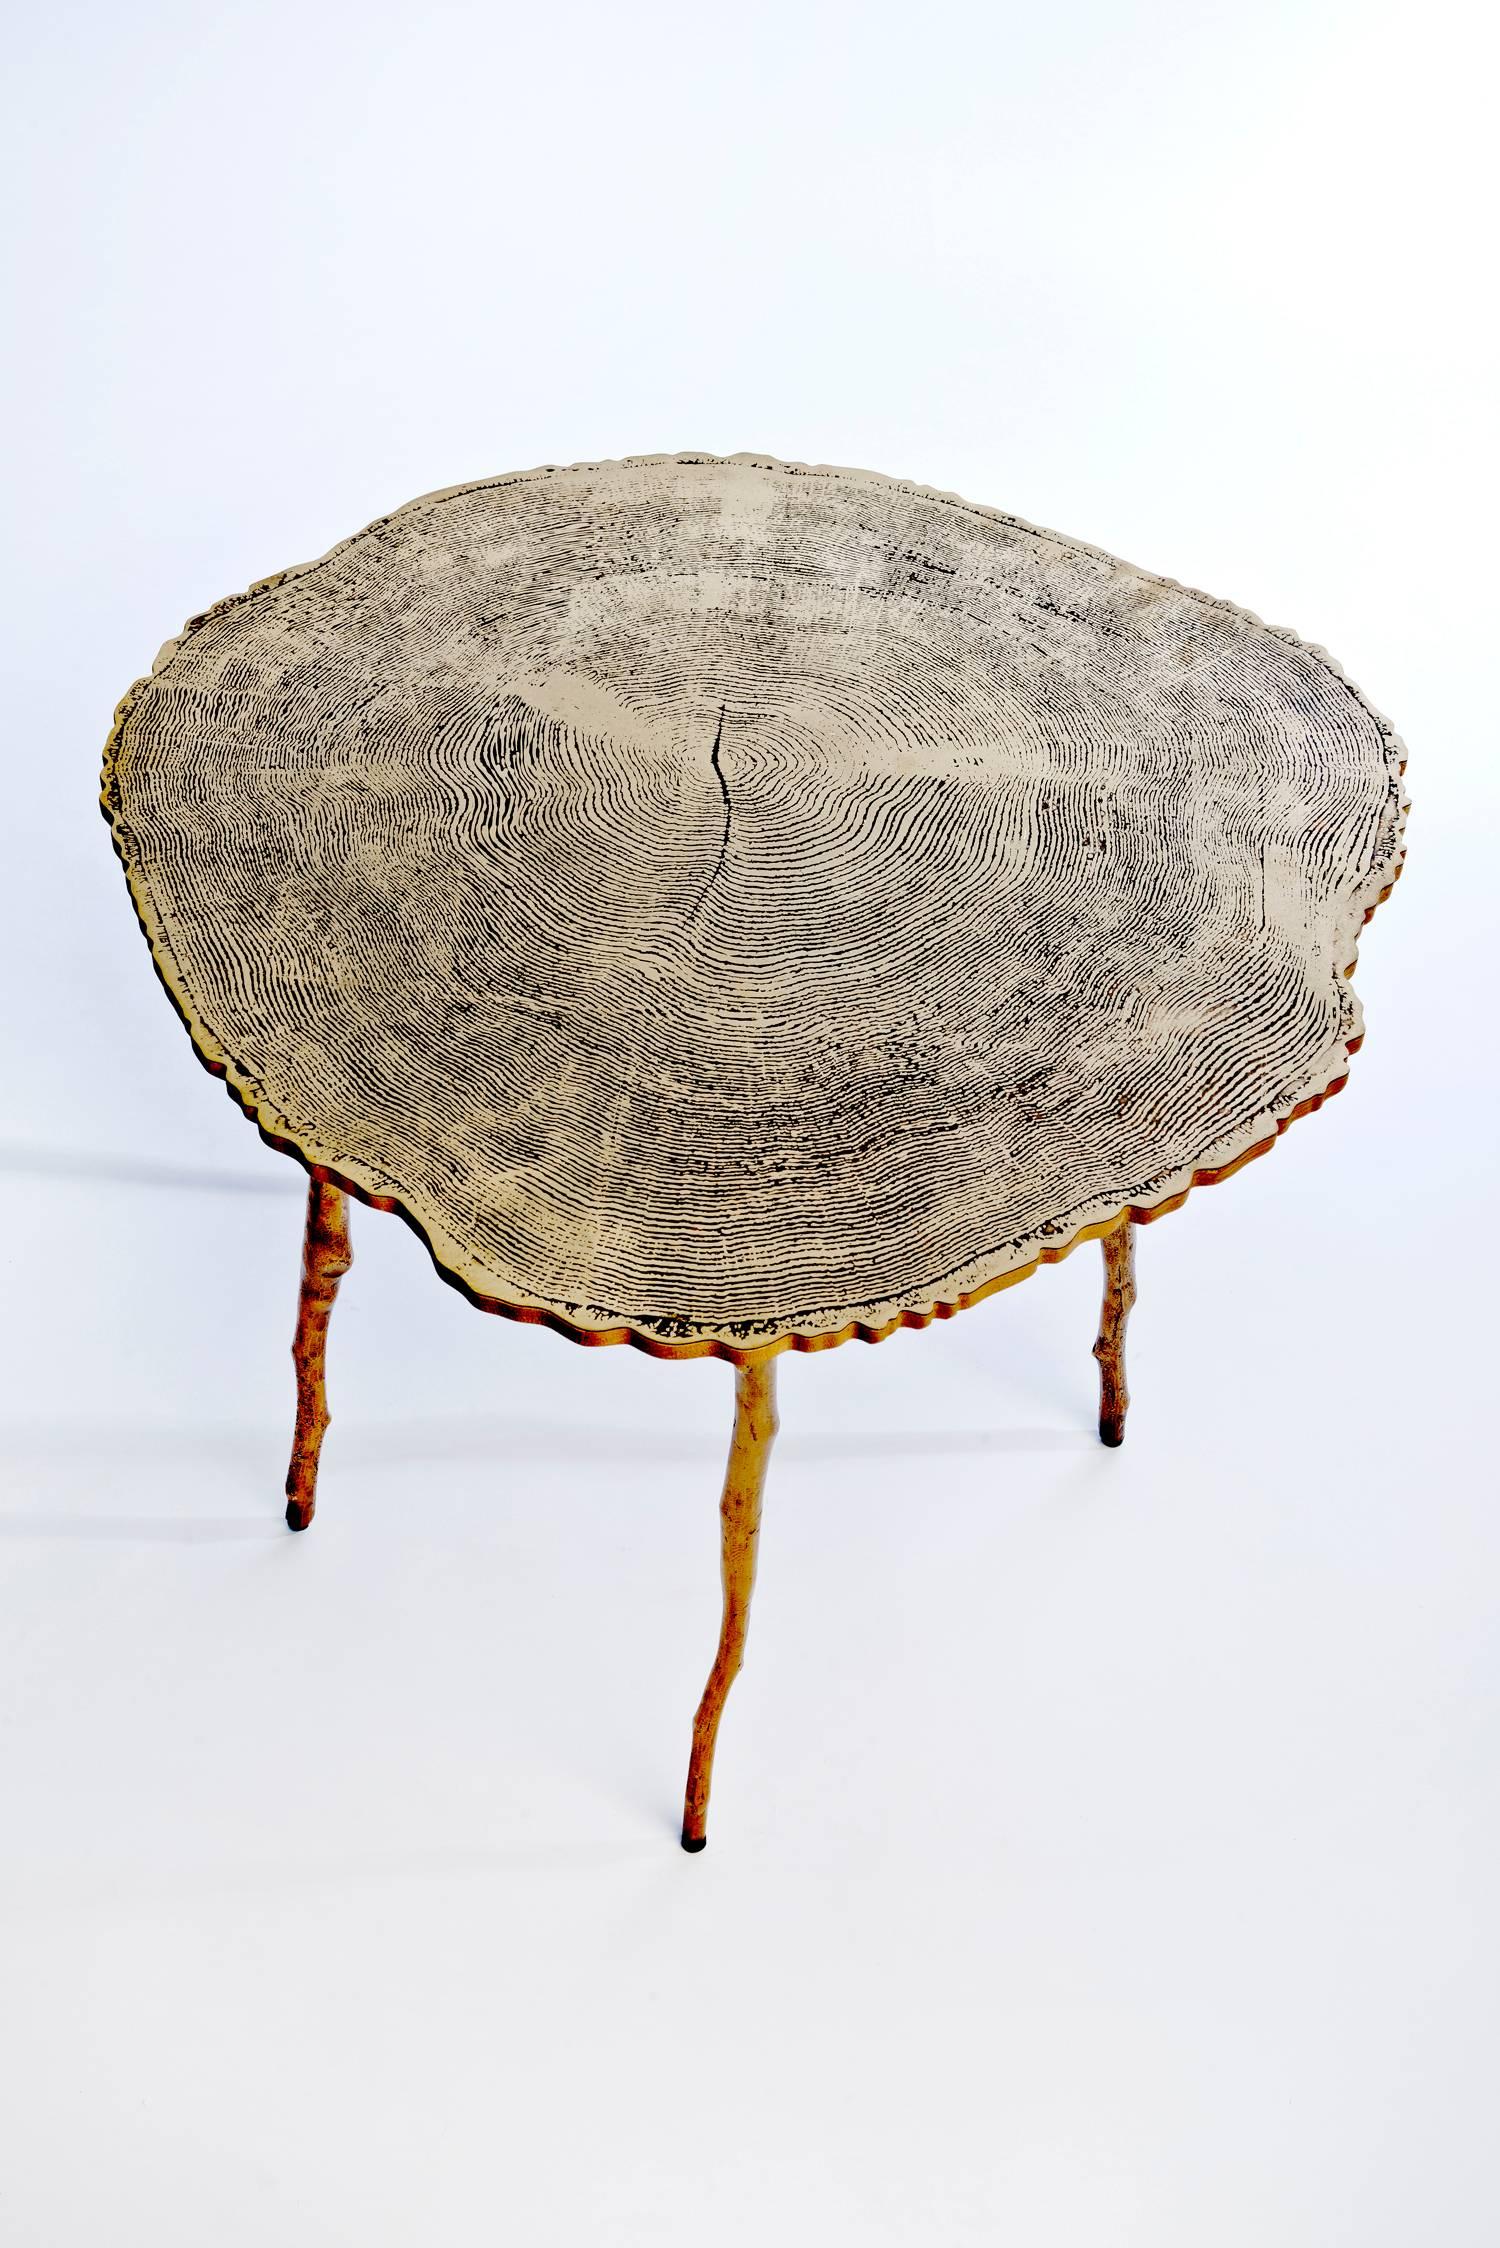 Sharon Sides
Echo Side Table, 2015
Hand formed acid etched brass, bronze and stacked laminated oak 
18.25 x 22.75 x 22 in
Edition of 12

Sharon Sides is the Owner & Chief of Design of Sharon Sides Design Studio.

Sharon is a B.DES graduate from the